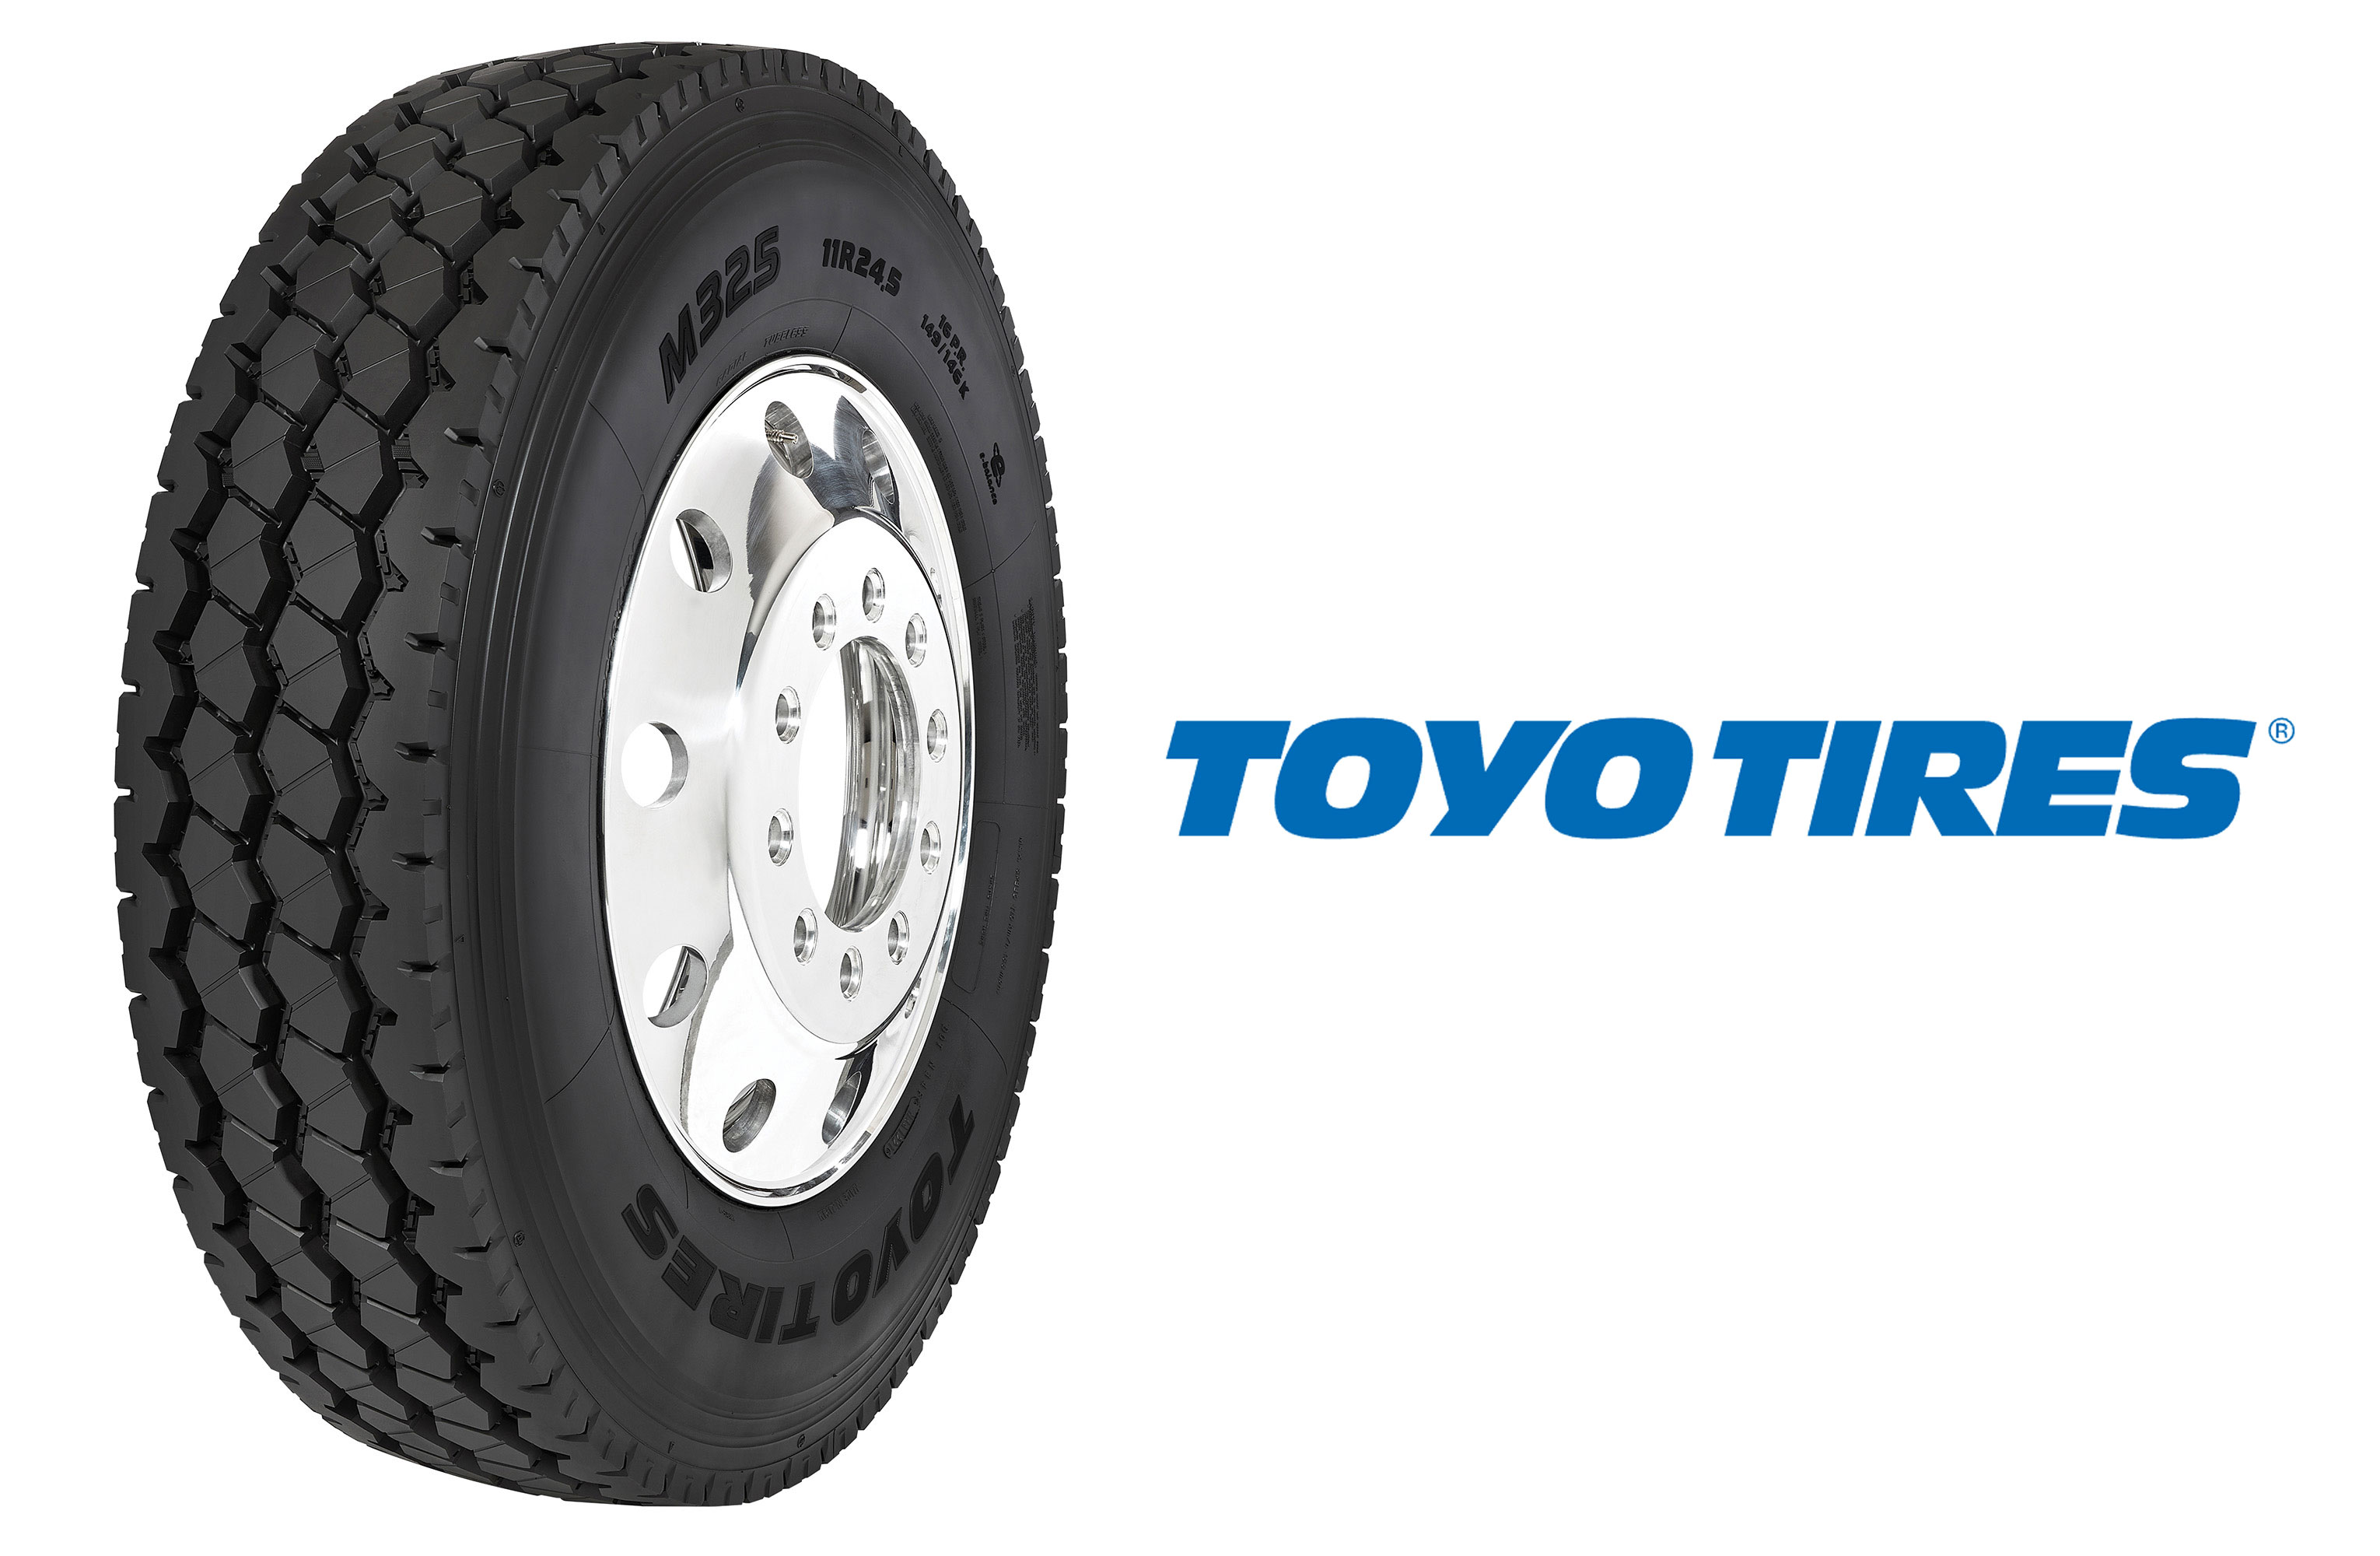 Toyo Tires® Introduces Heavy Duty M325 Tire for Construction, Mining, Energy and Logging Industries